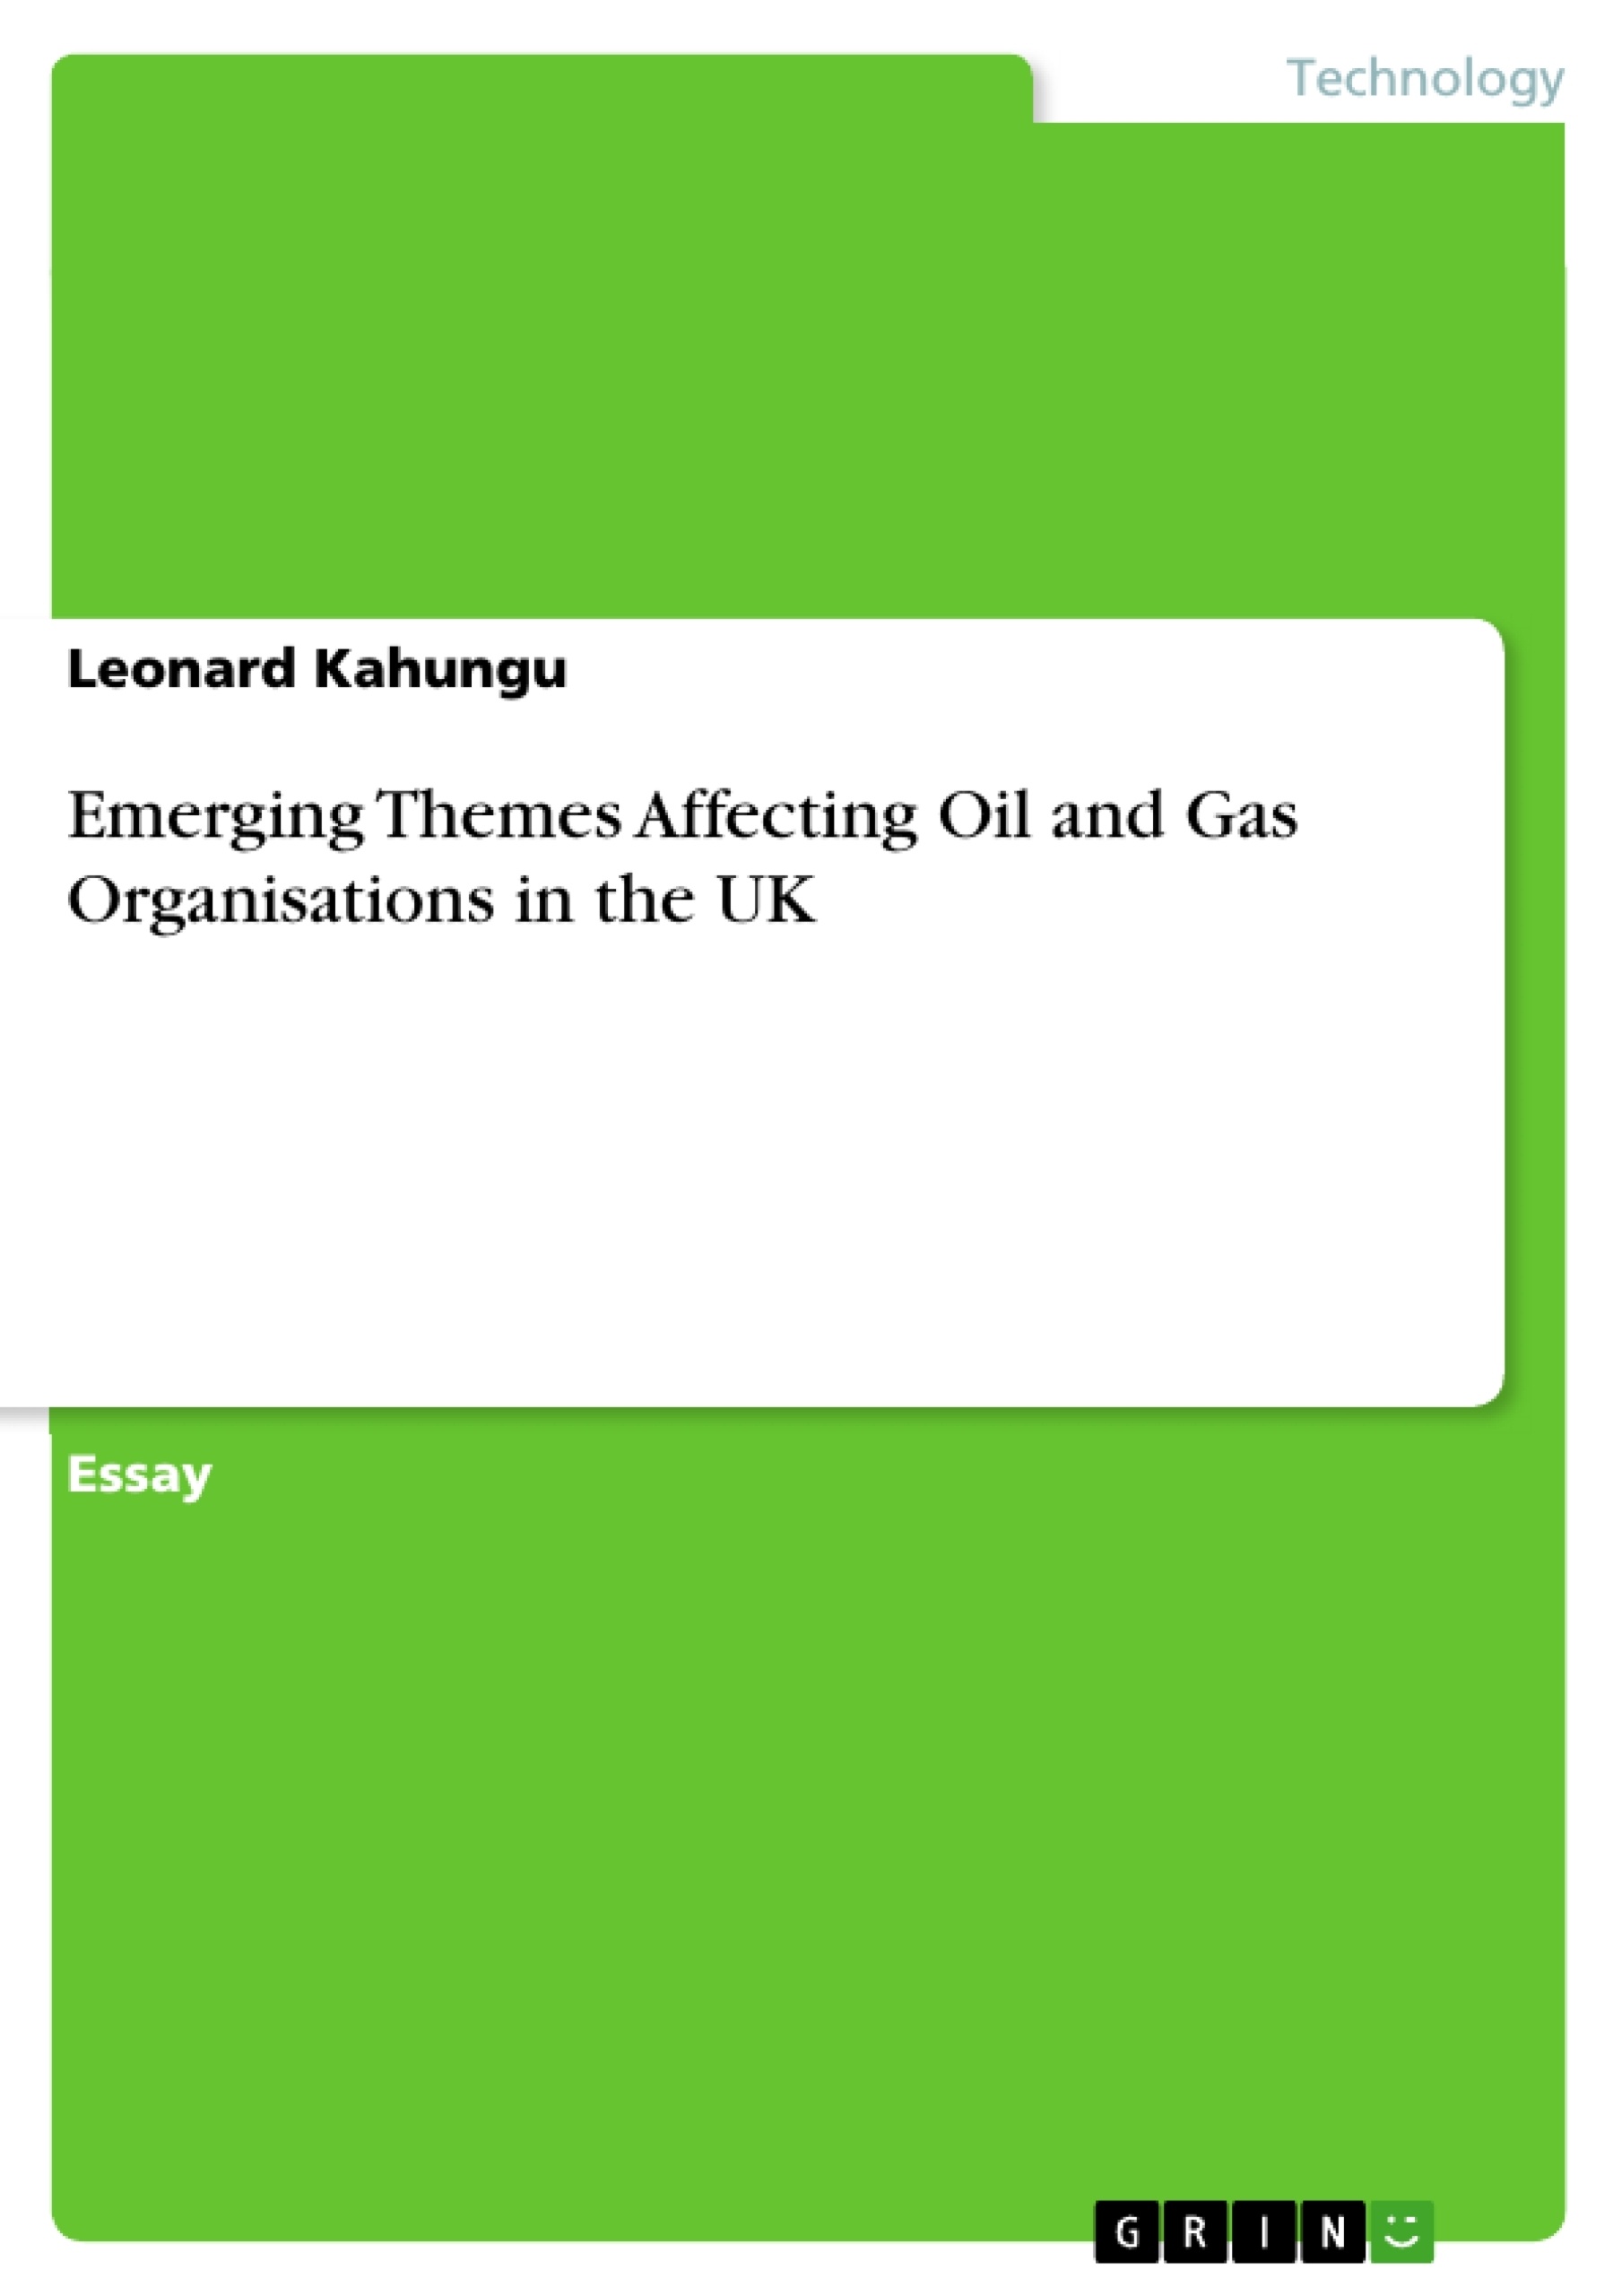 Title: Emerging Themes Affecting Oil and Gas Organisations in the UK